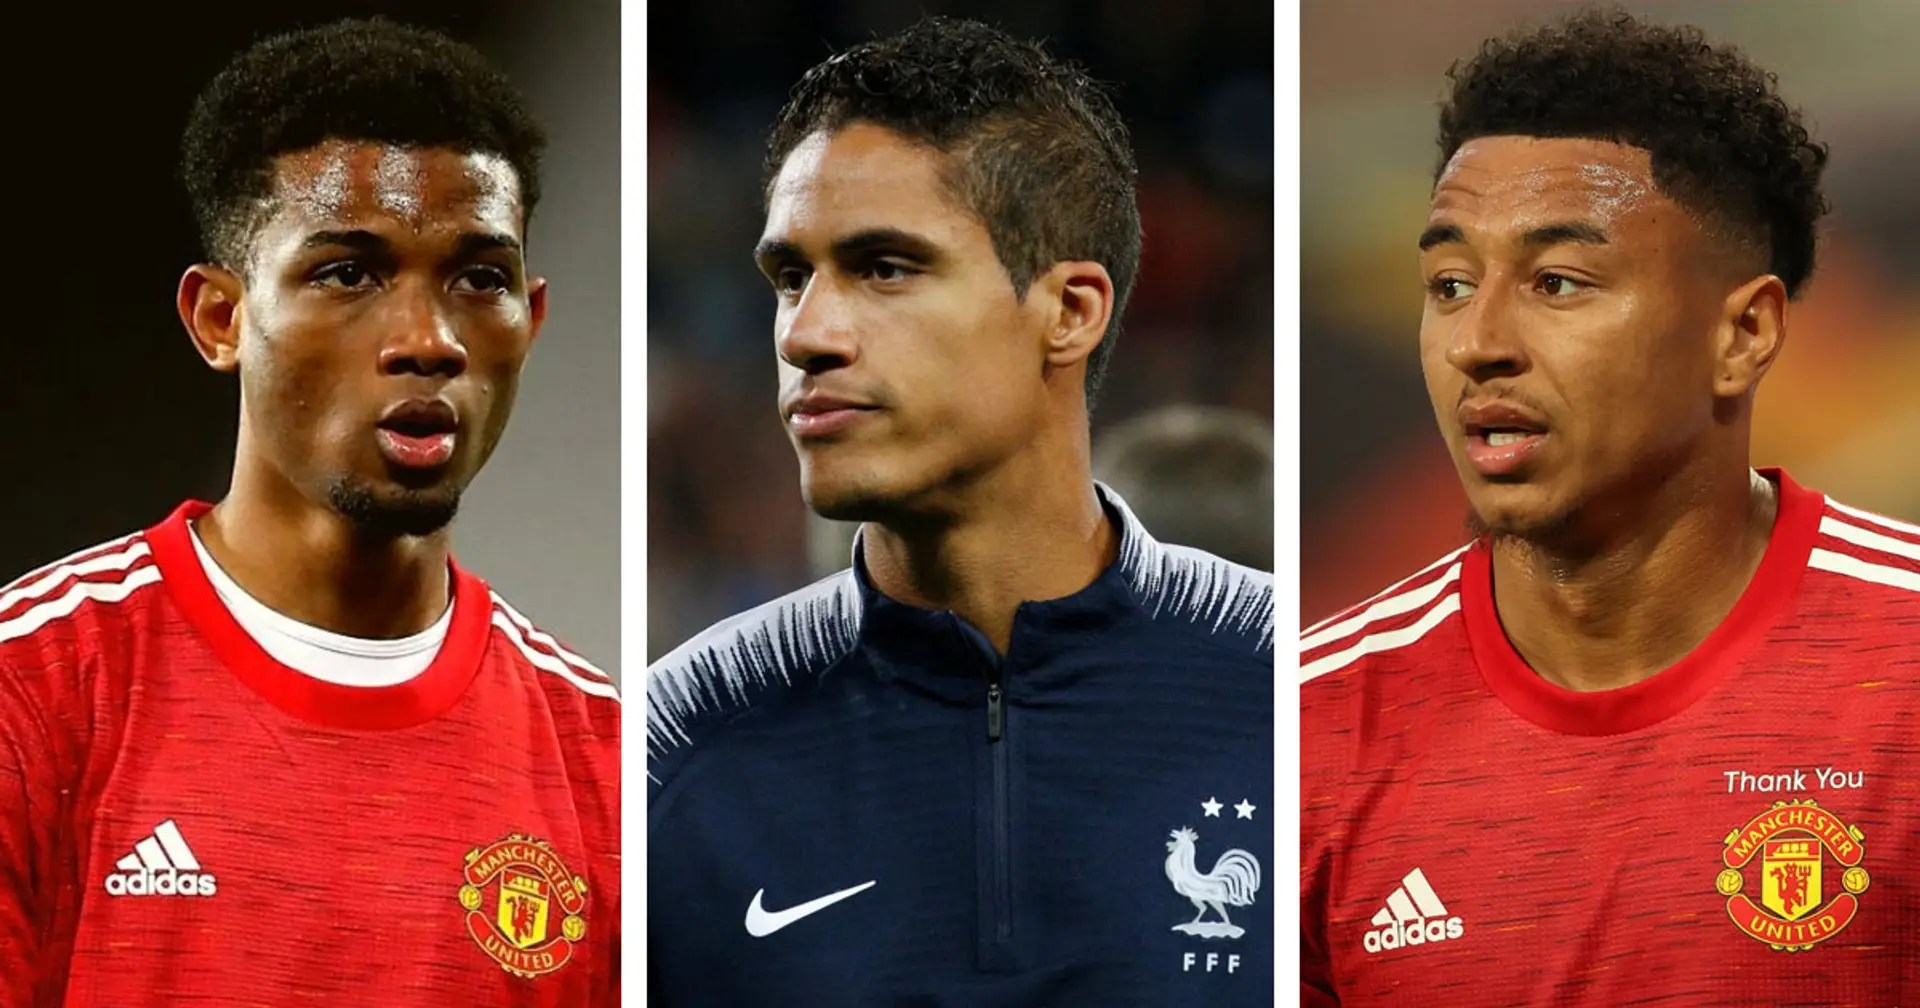 Man United's transfers so far: £73m spent, 5 potential ins, 7 potential outs with probability ratings